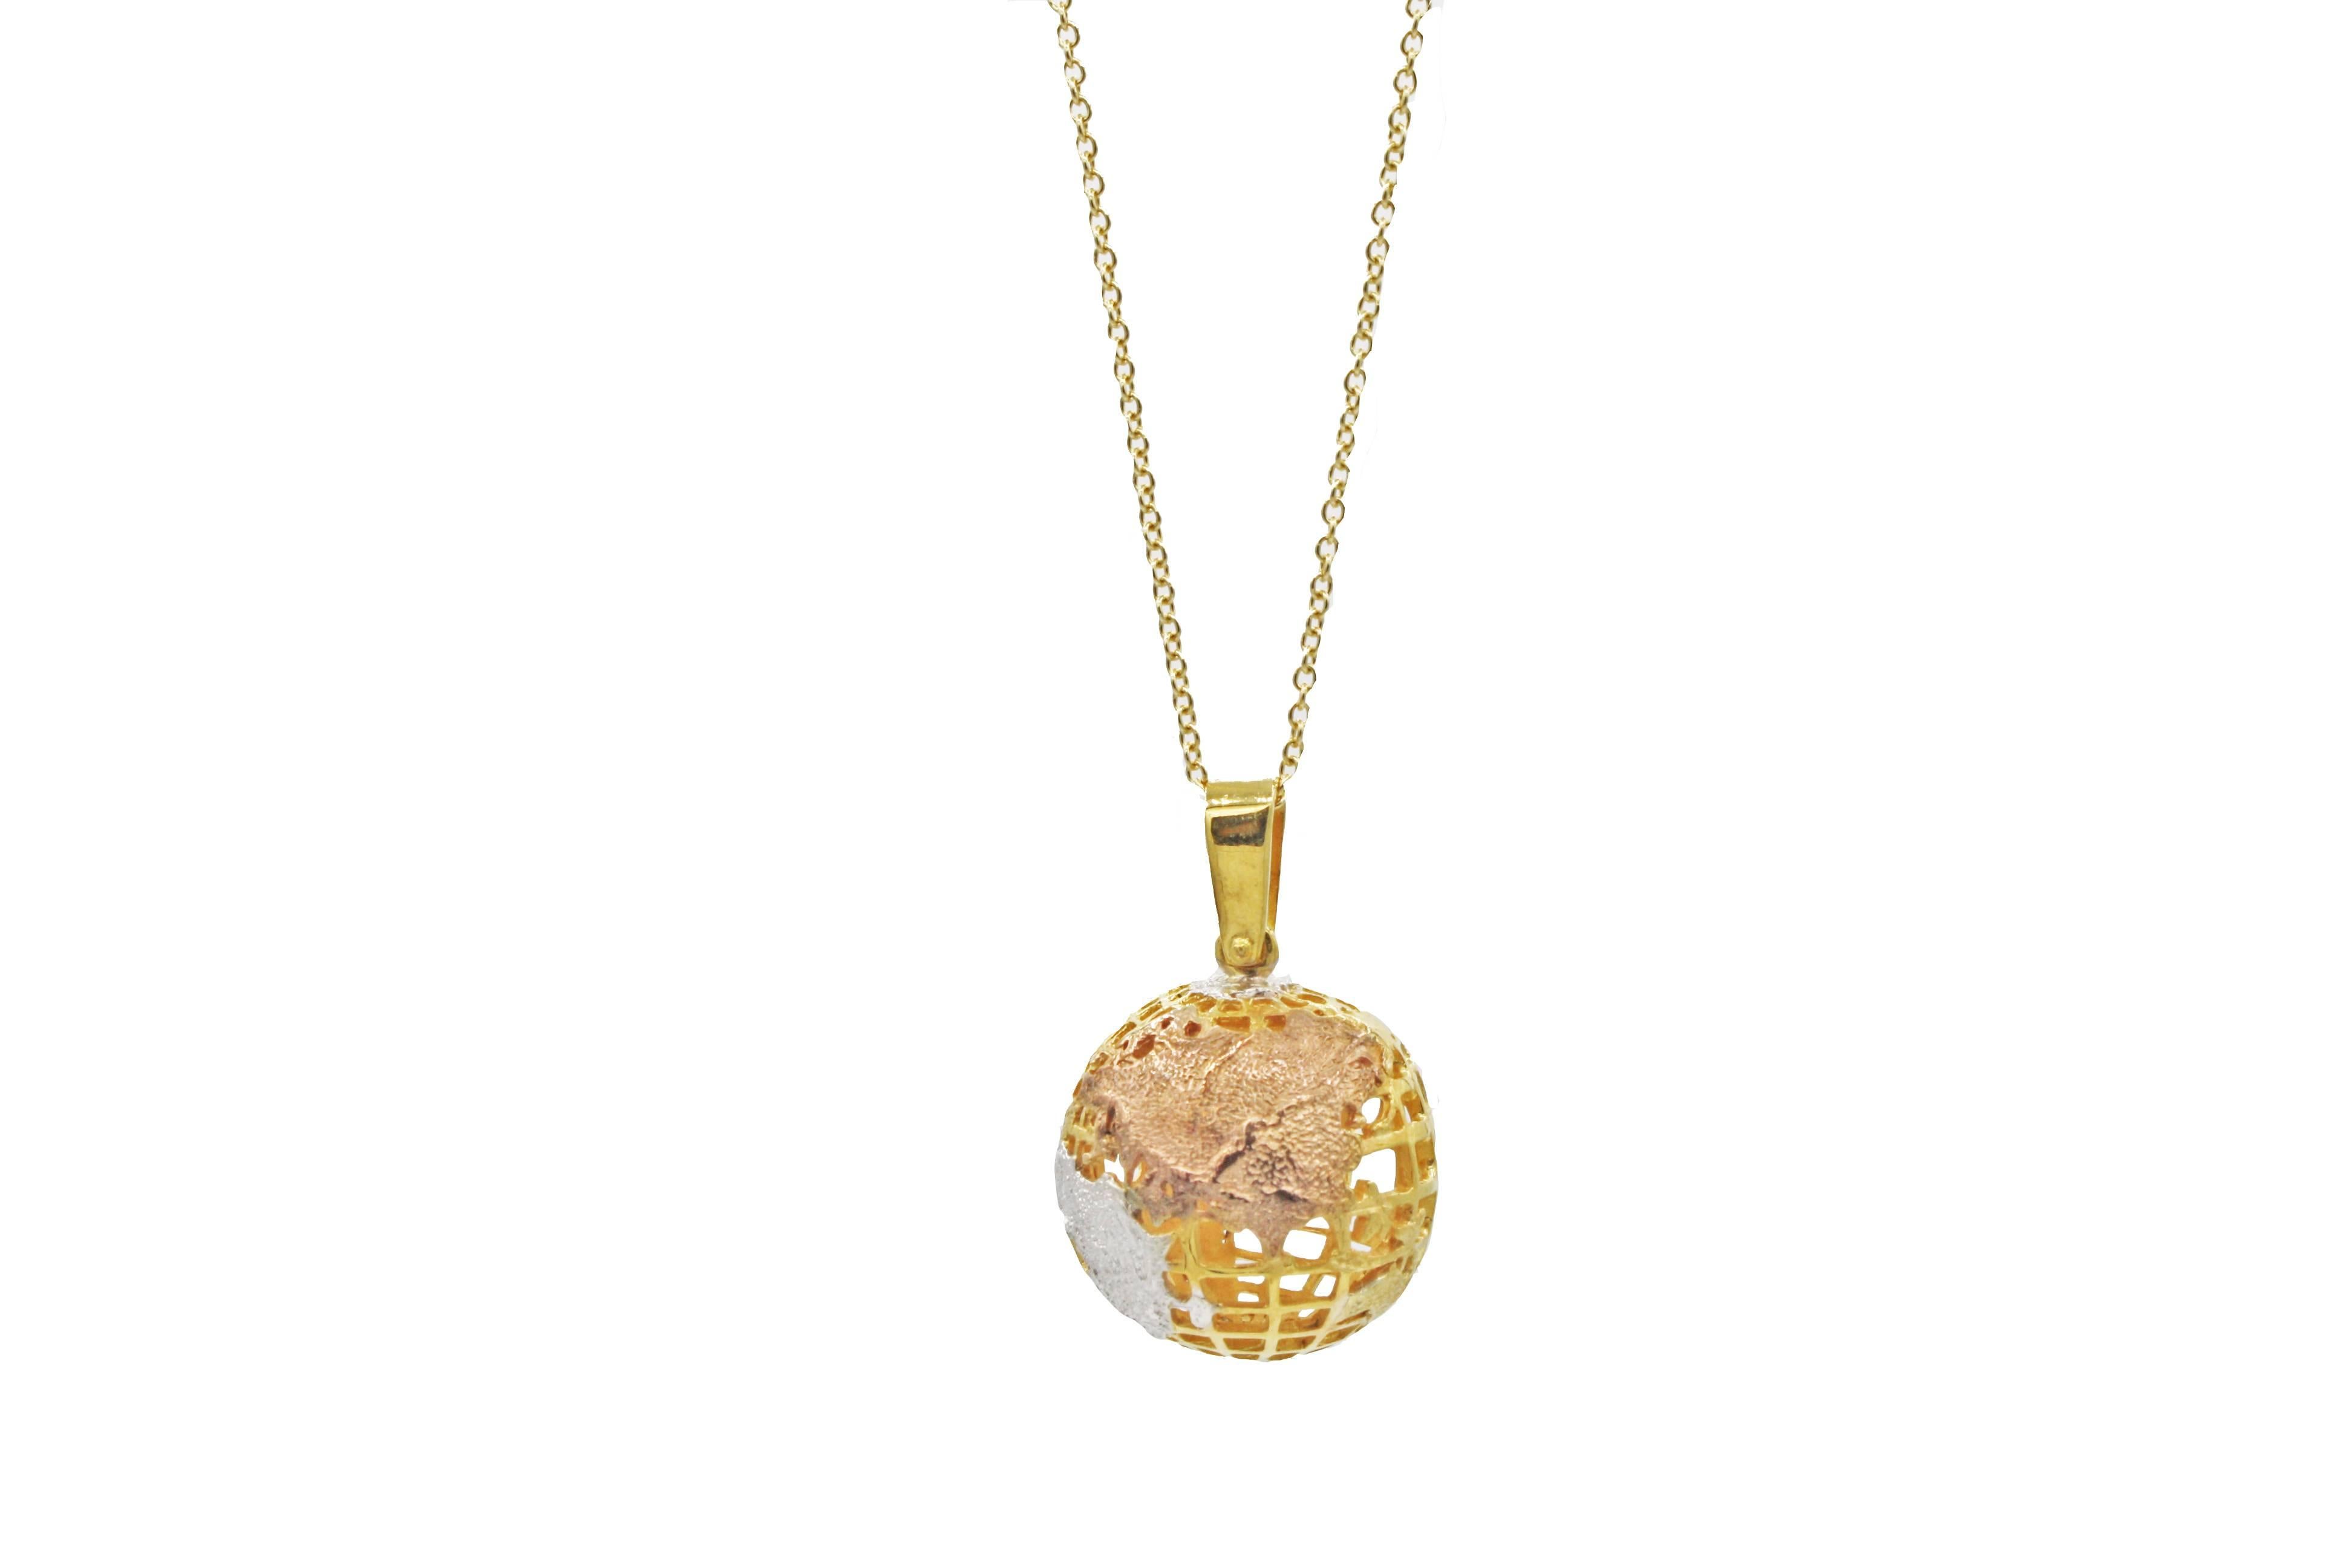 This pendant necklace features an 18kt yellow, white, and rose gold globe pendant, which has consistent, nice weight.  A playful piece that can be layered with other pieces.